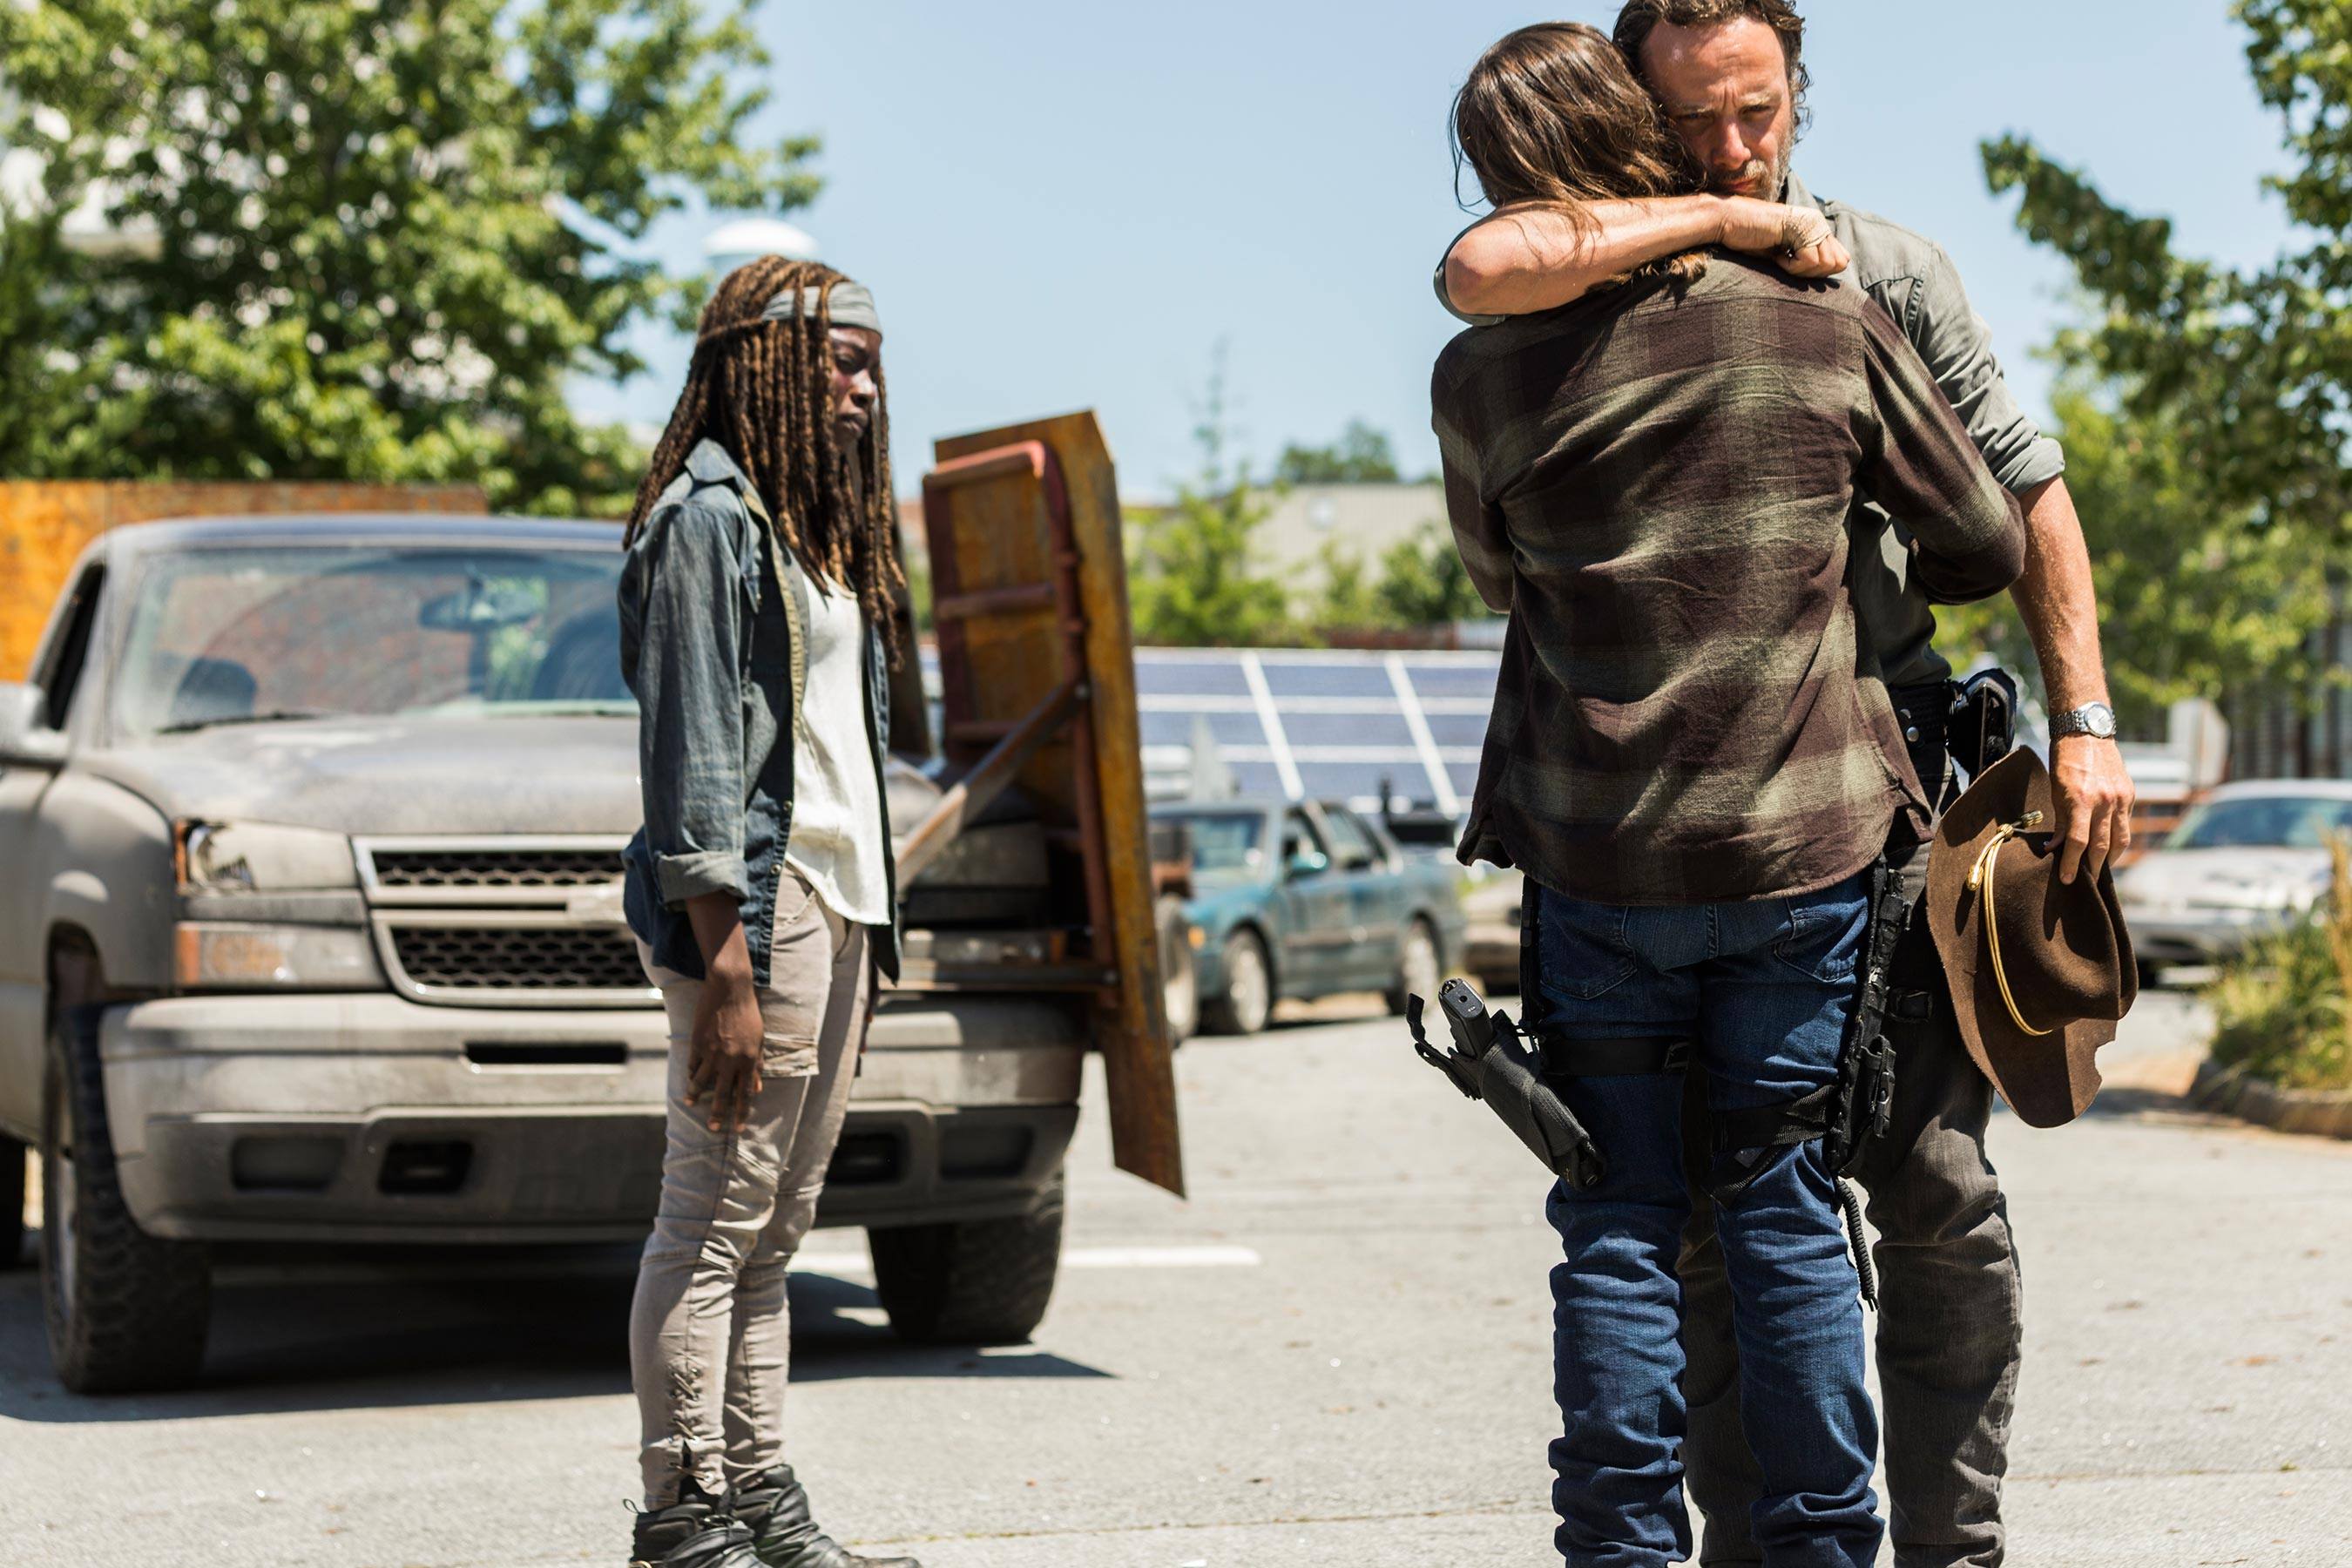 Carl and Rick embrace while Michonne stands away from them